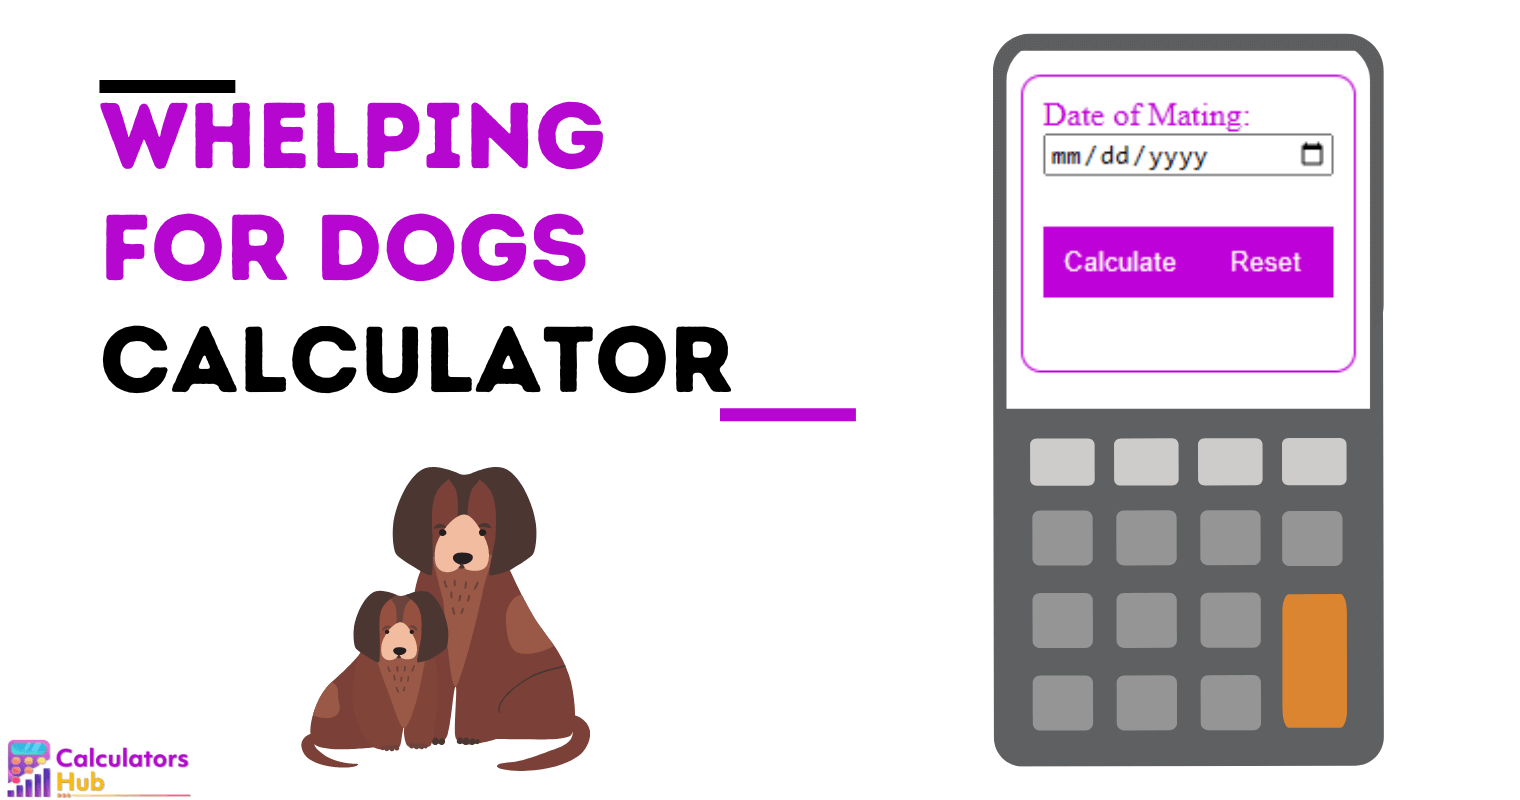 Whelping Calculator For Dogs